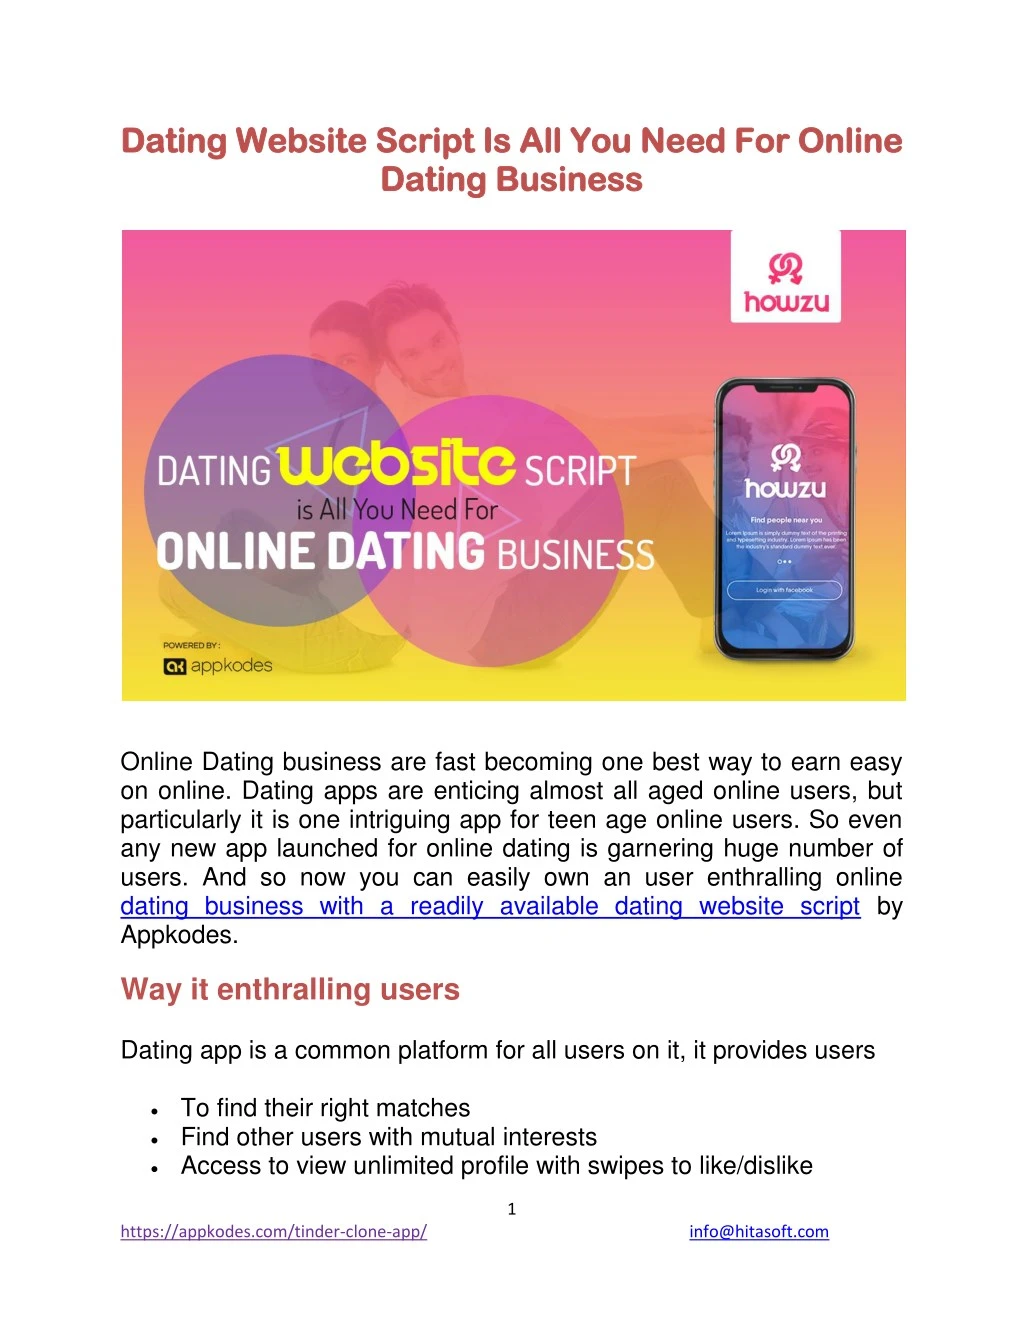 dating website script is all you need for online